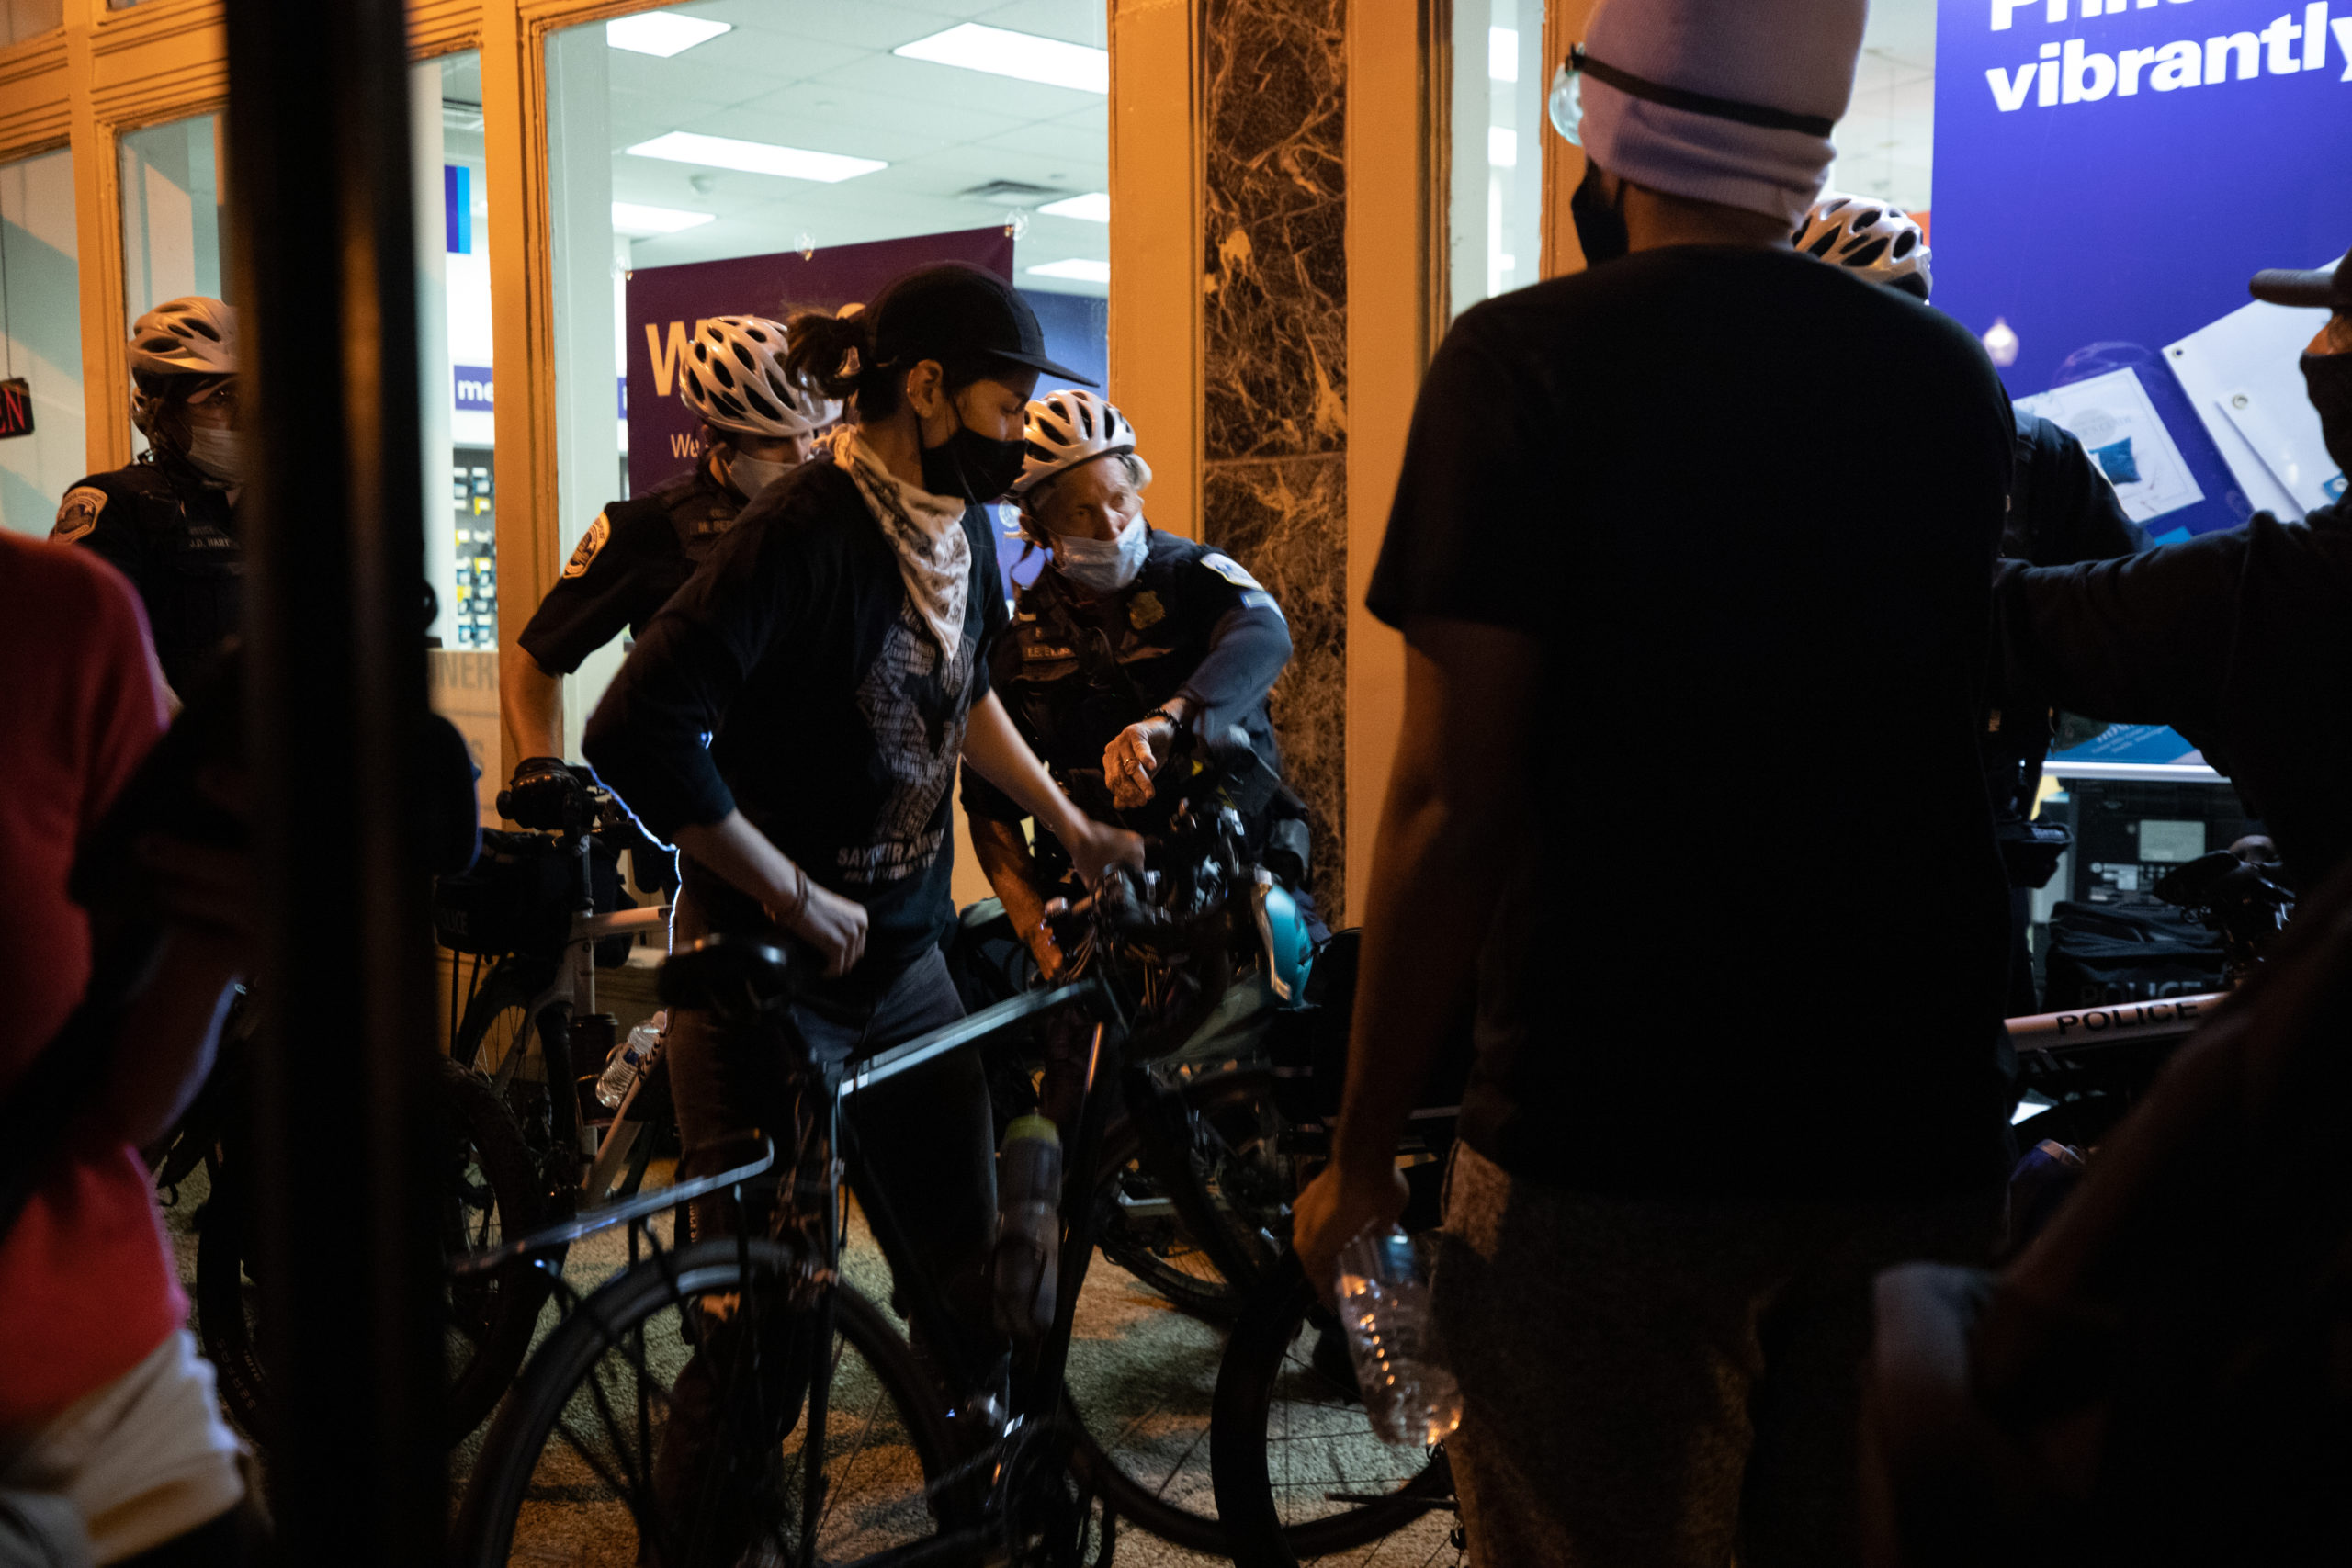 Protesters and Metropolitan Police Department officers briefly skirmished as officers tried to form a bike line between the protesters and shop windows in Washington, D.C. on Sept. 23. (Photo: Kaylee Greenlee / DCNF)